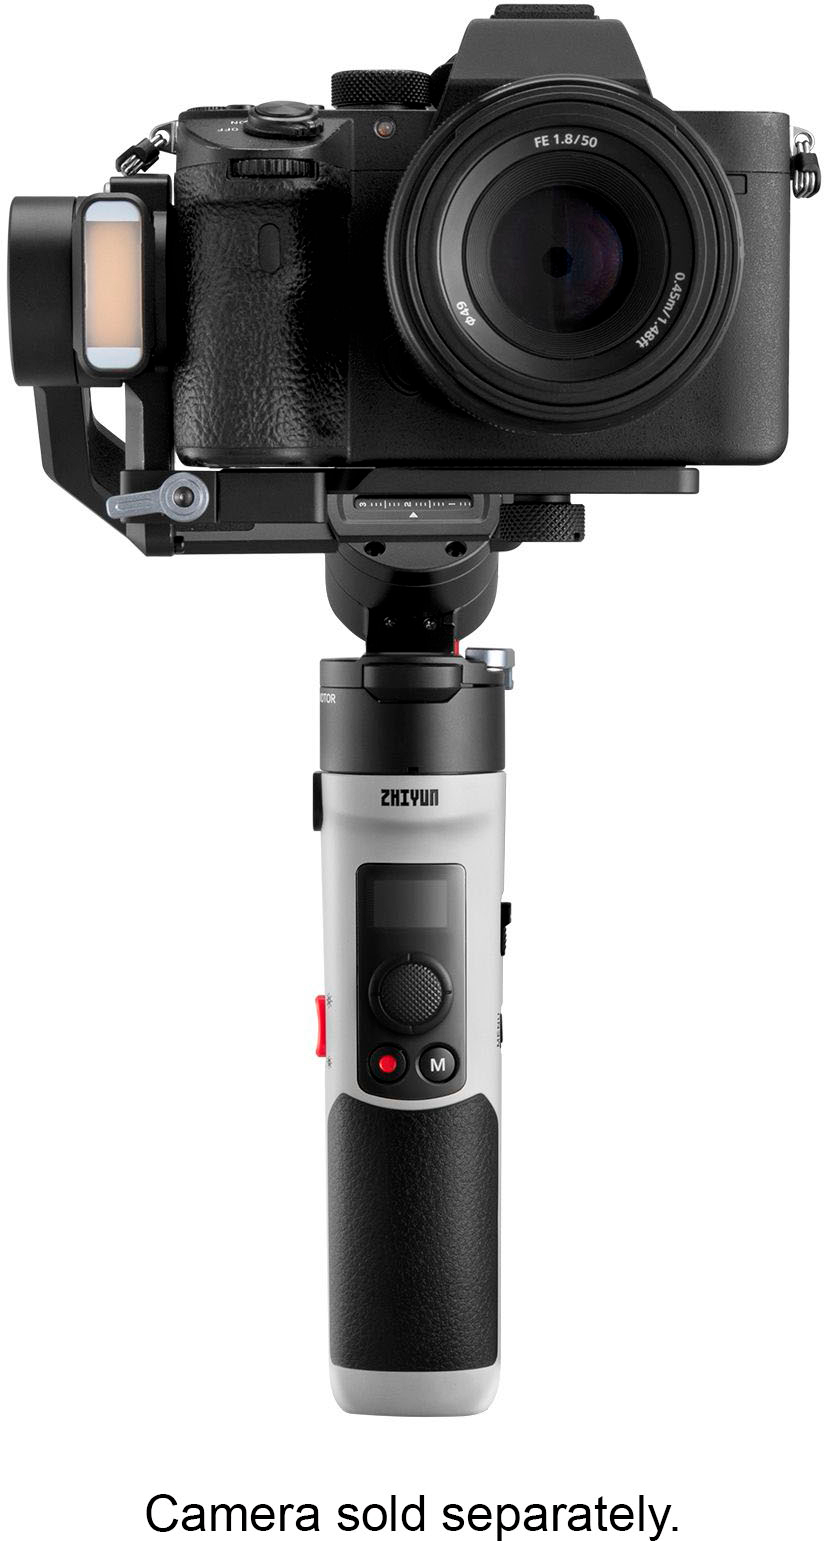 Angle View: Zhiyun - Crane-M2 S 3-Axis Gimbal Stabilizer for Smartphones, Action, or Mirrorless Cameras with Detachable Tri-pod Stand - Gray